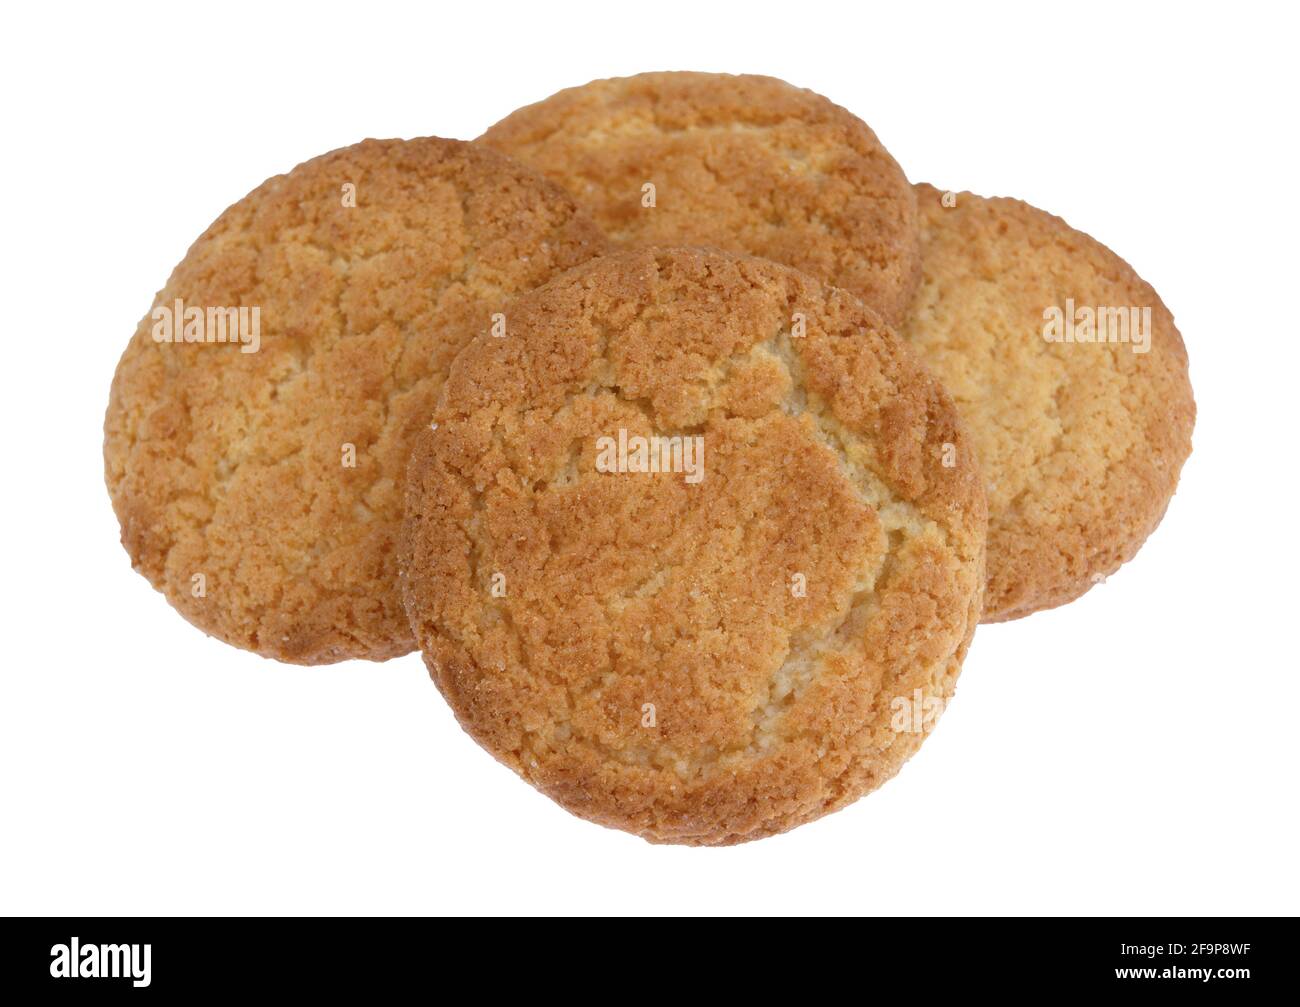 Four coconut flavor cookies arranged and isolated on a white background. Stock Photo